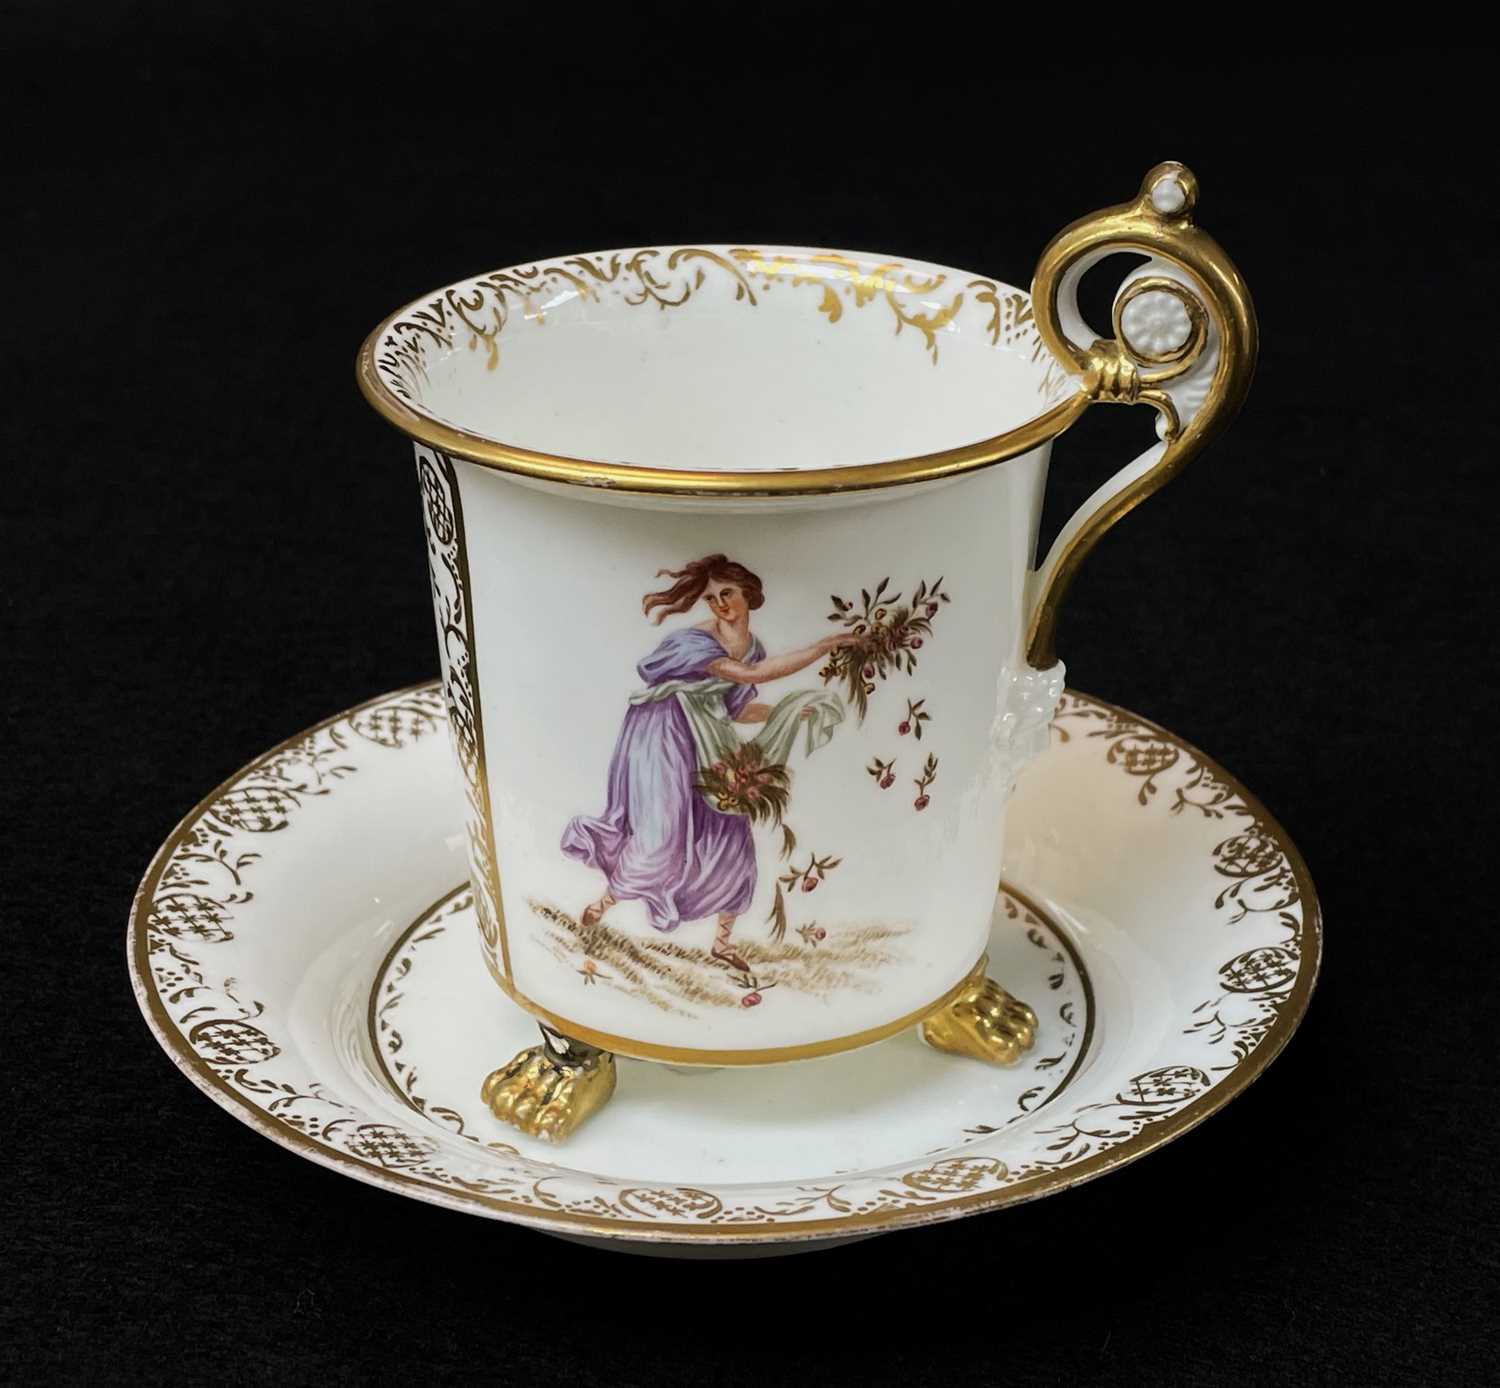 RARE SWANSEA PORCELAIN CABINET CUP & SAUCER circa 1814-1820, the cup of cylindrical form with - Image 3 of 3